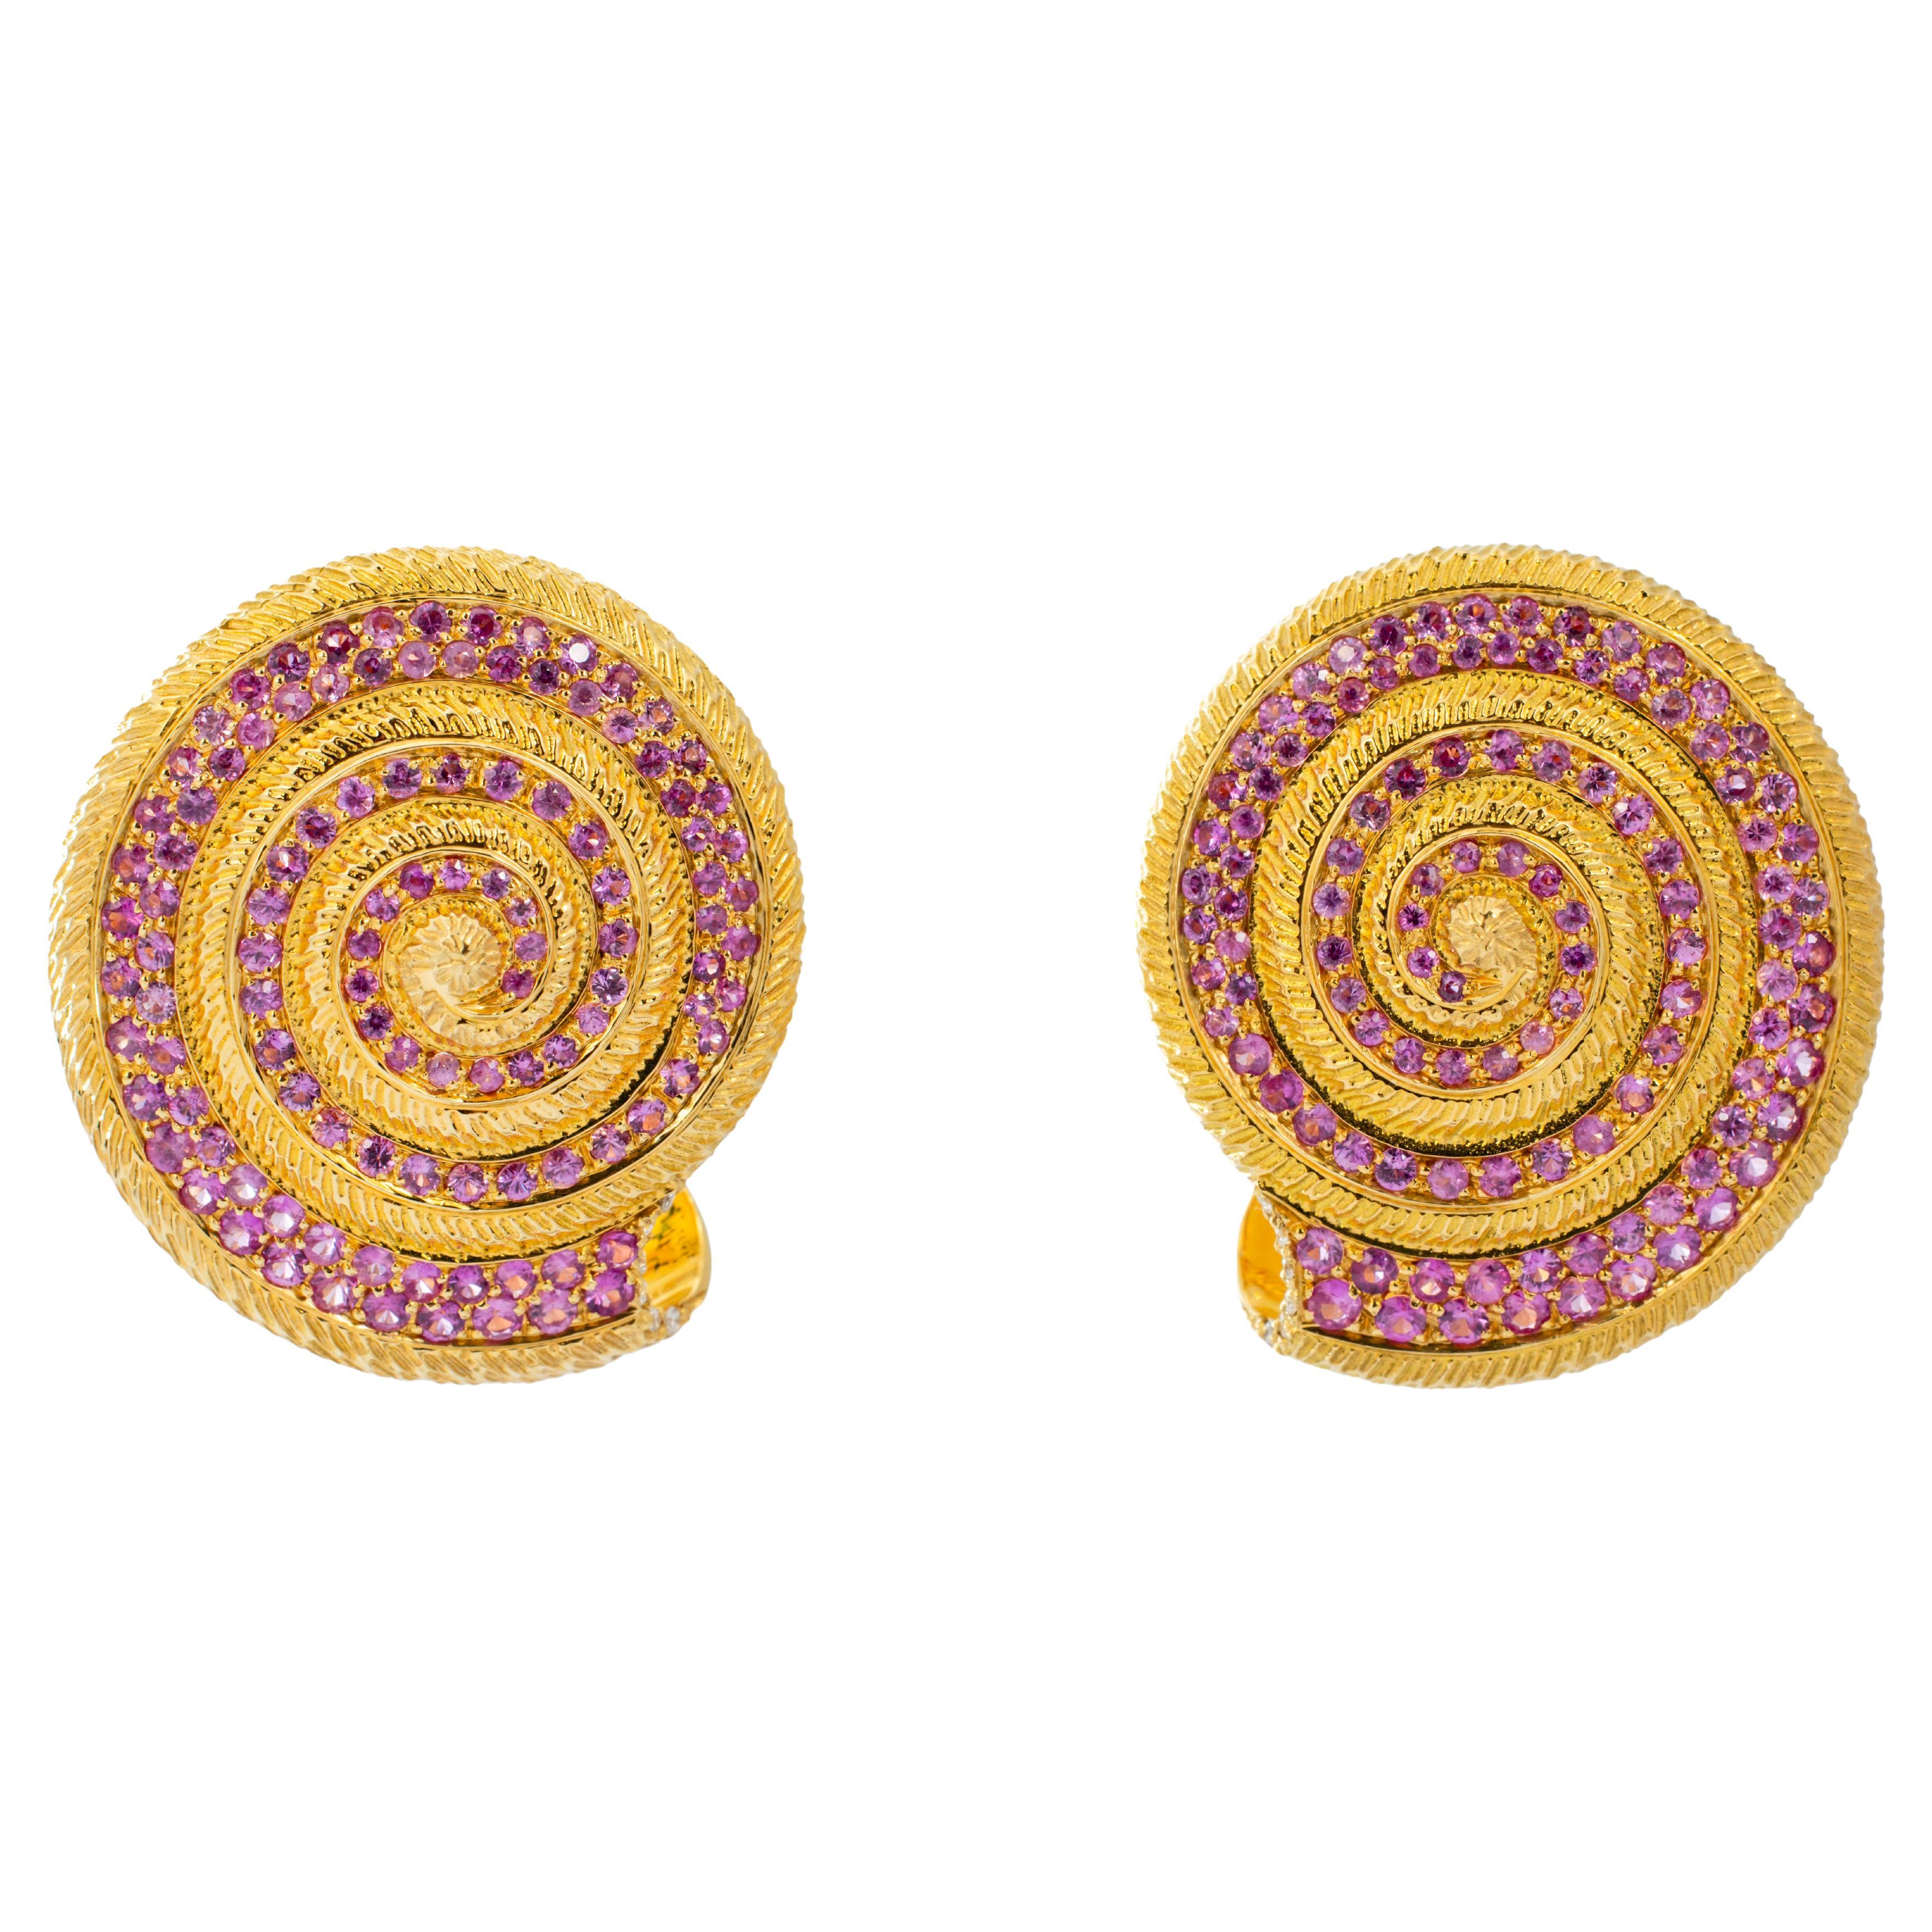 "Costis" Snail Shell Frontal Earrings, Pave' with 4.07 Carats of Pink Sapphires For Sale